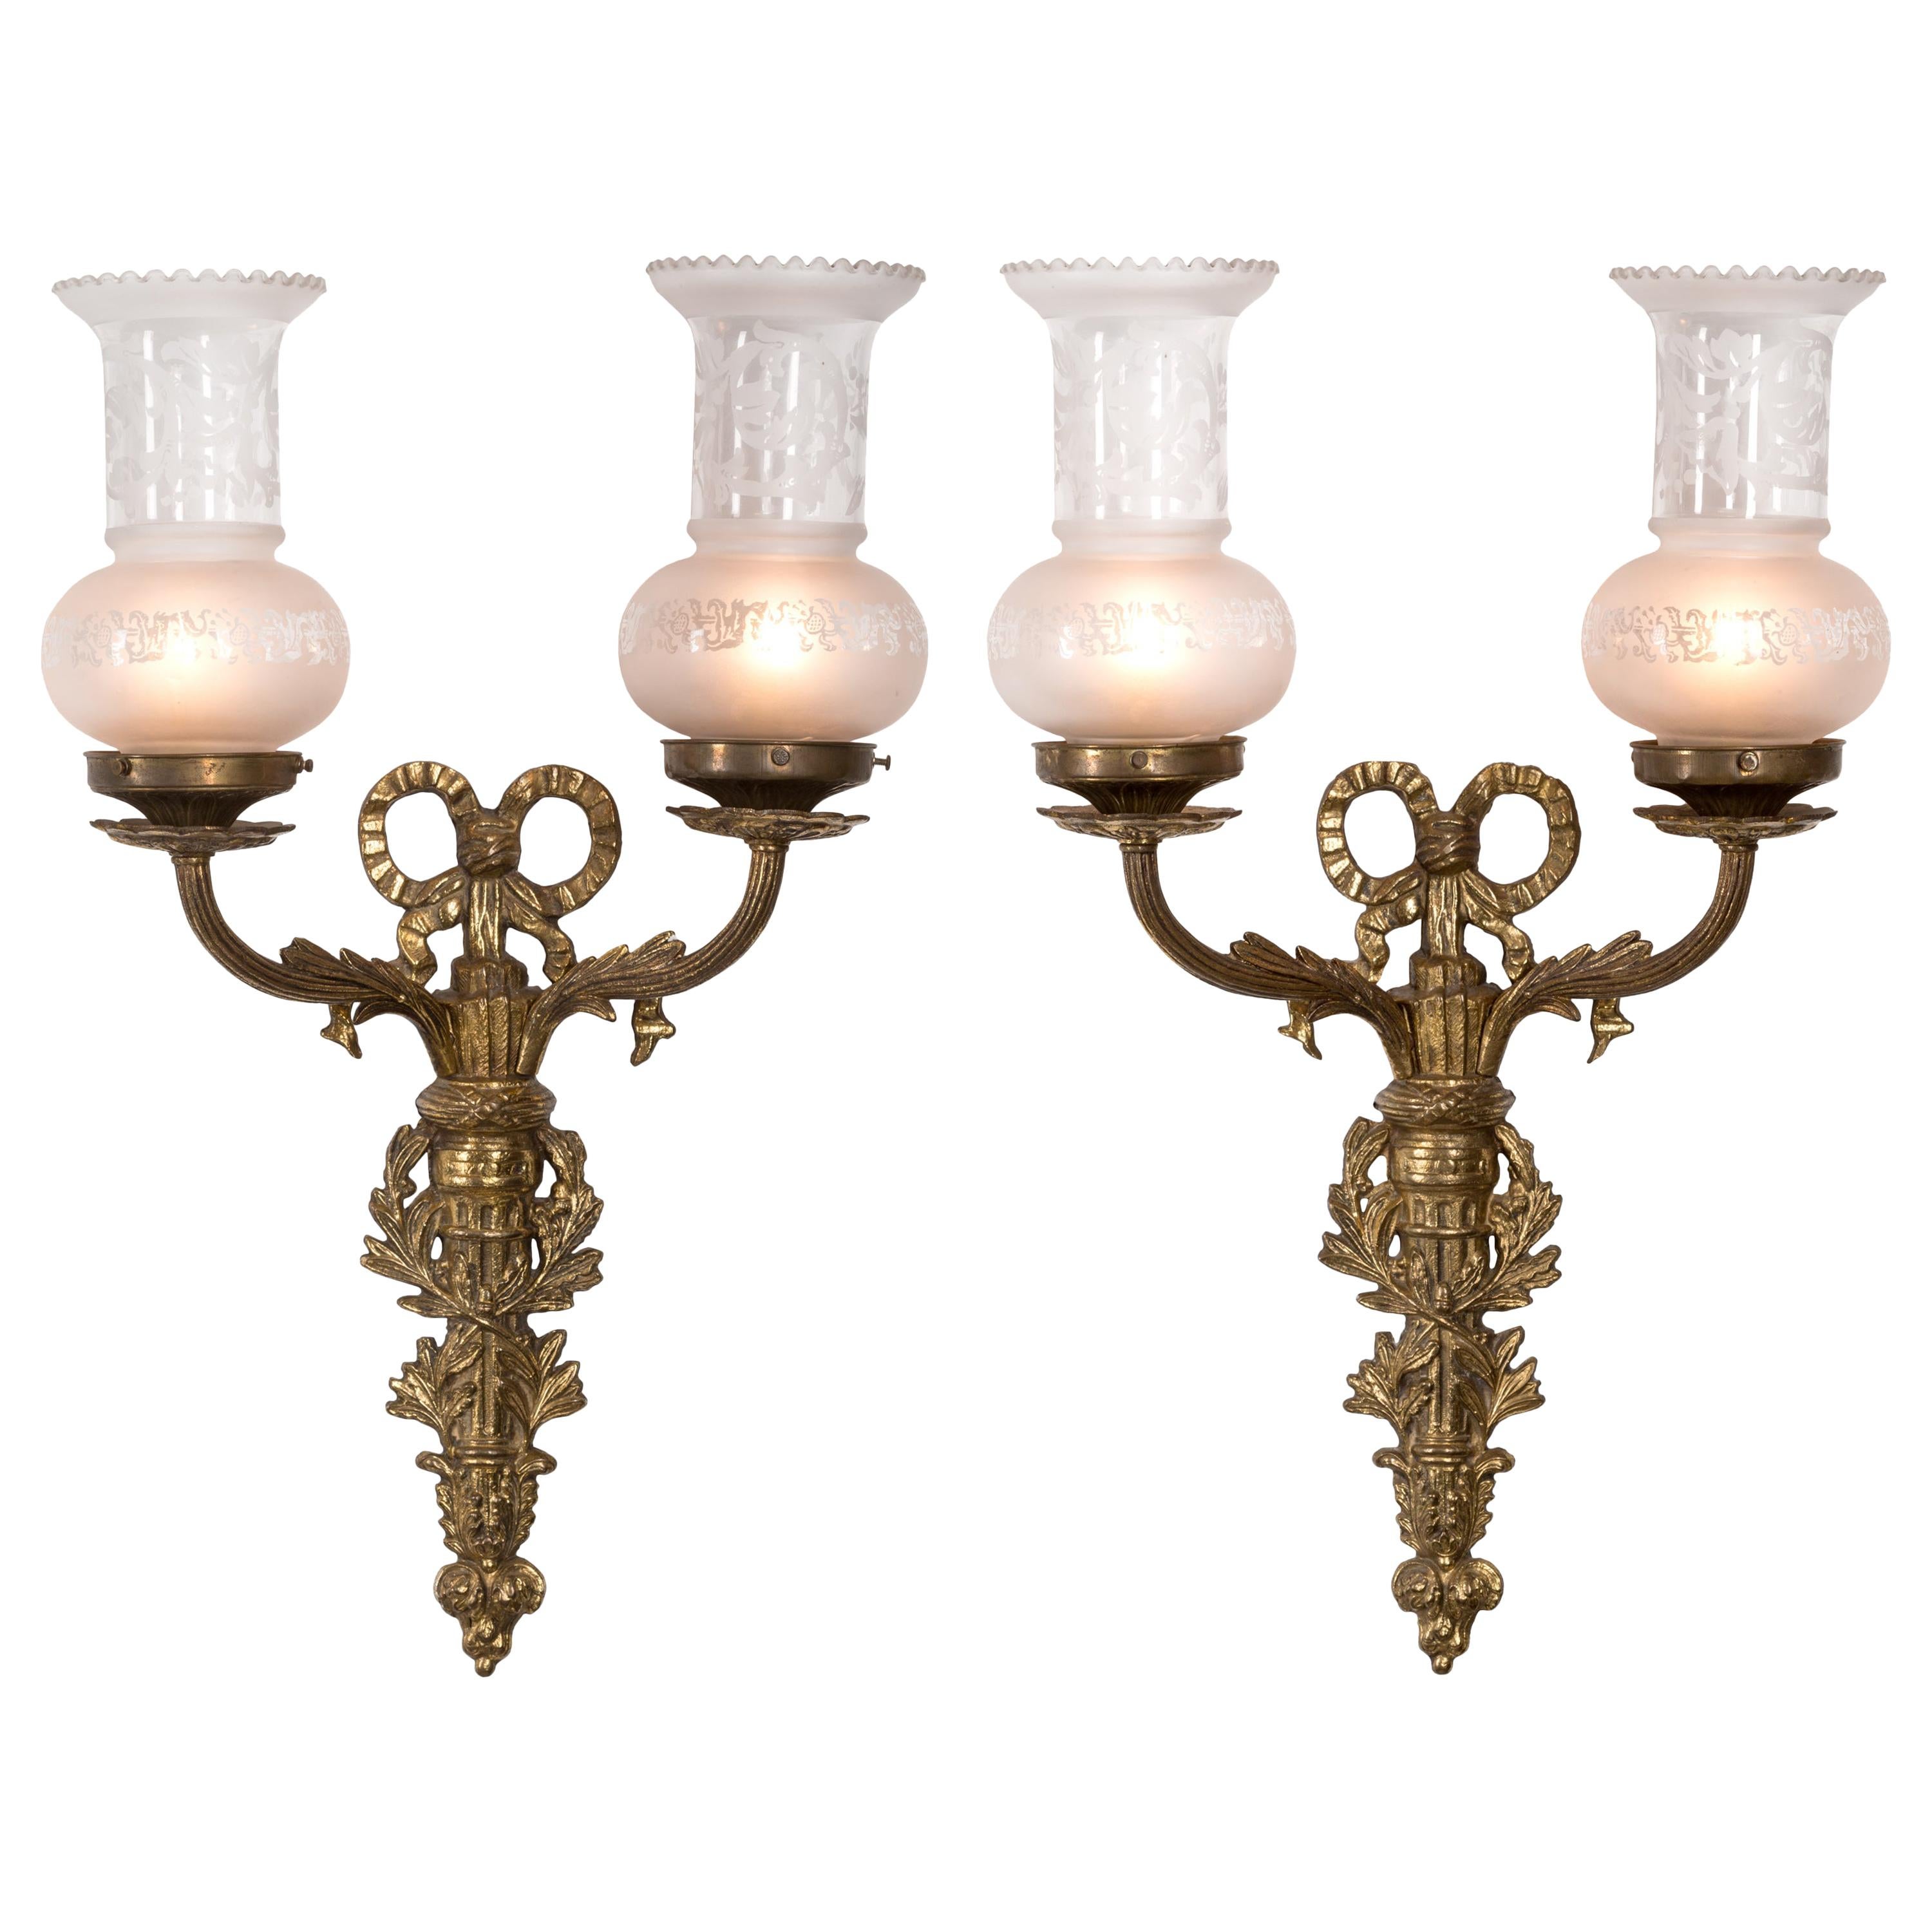 Pair of 19th Century French Louis XVI Style Appliqué Wall Sconces, Electrified